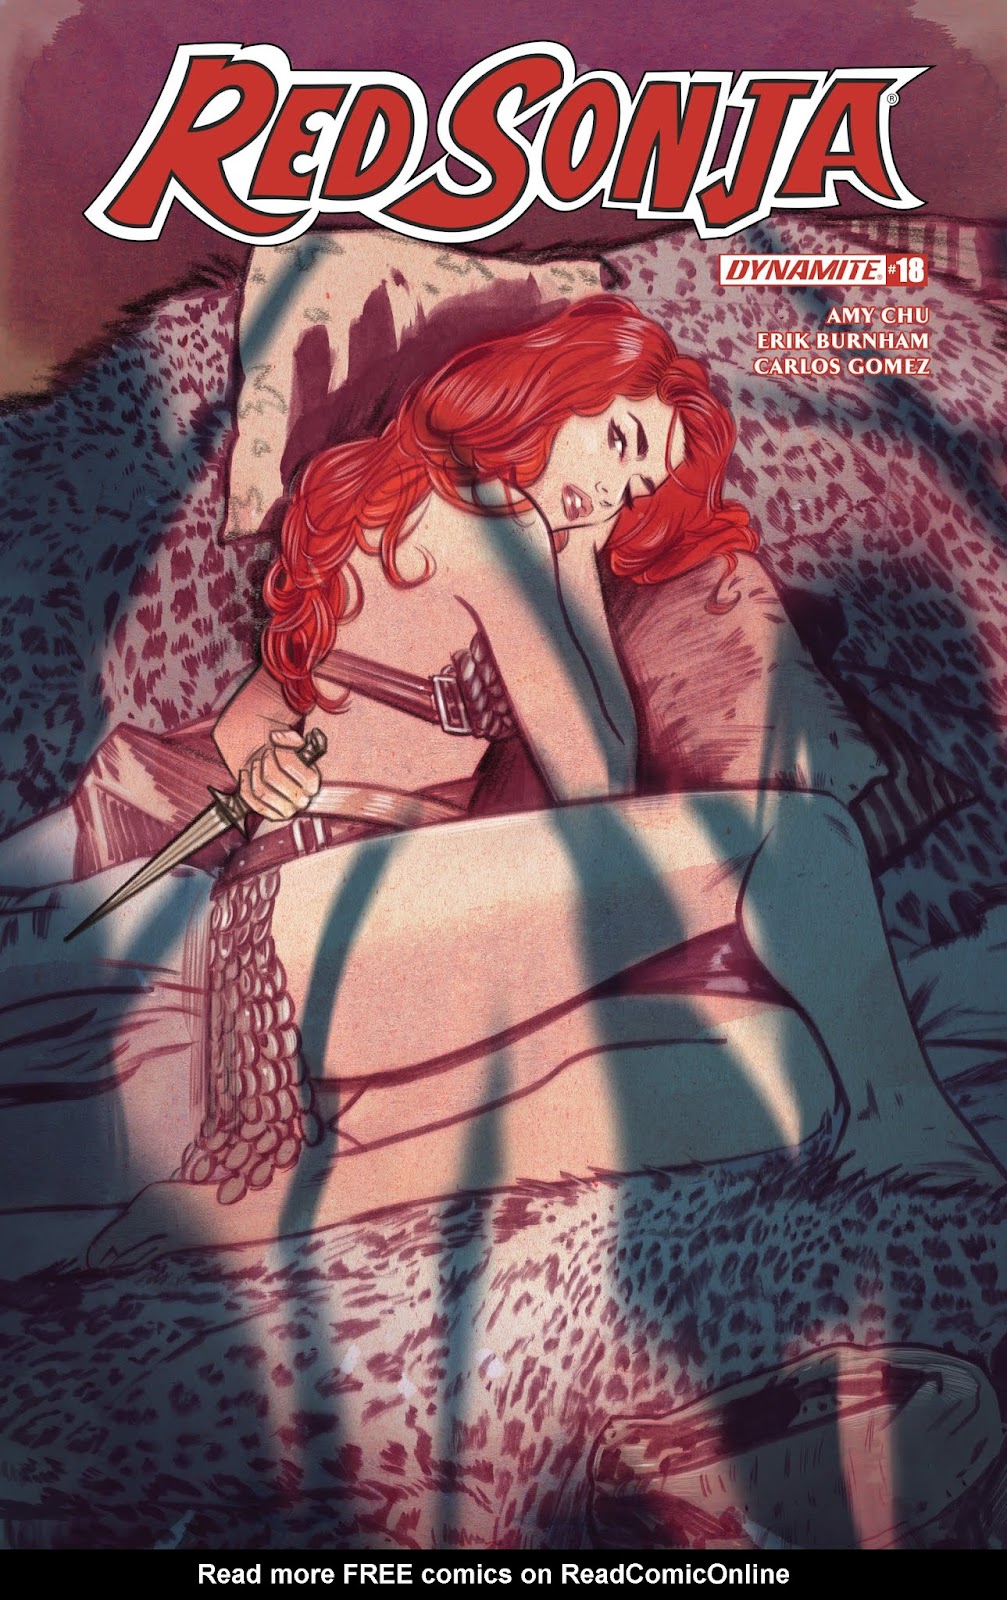 Red Sonja Vol. 4 issue 18 - Page 1